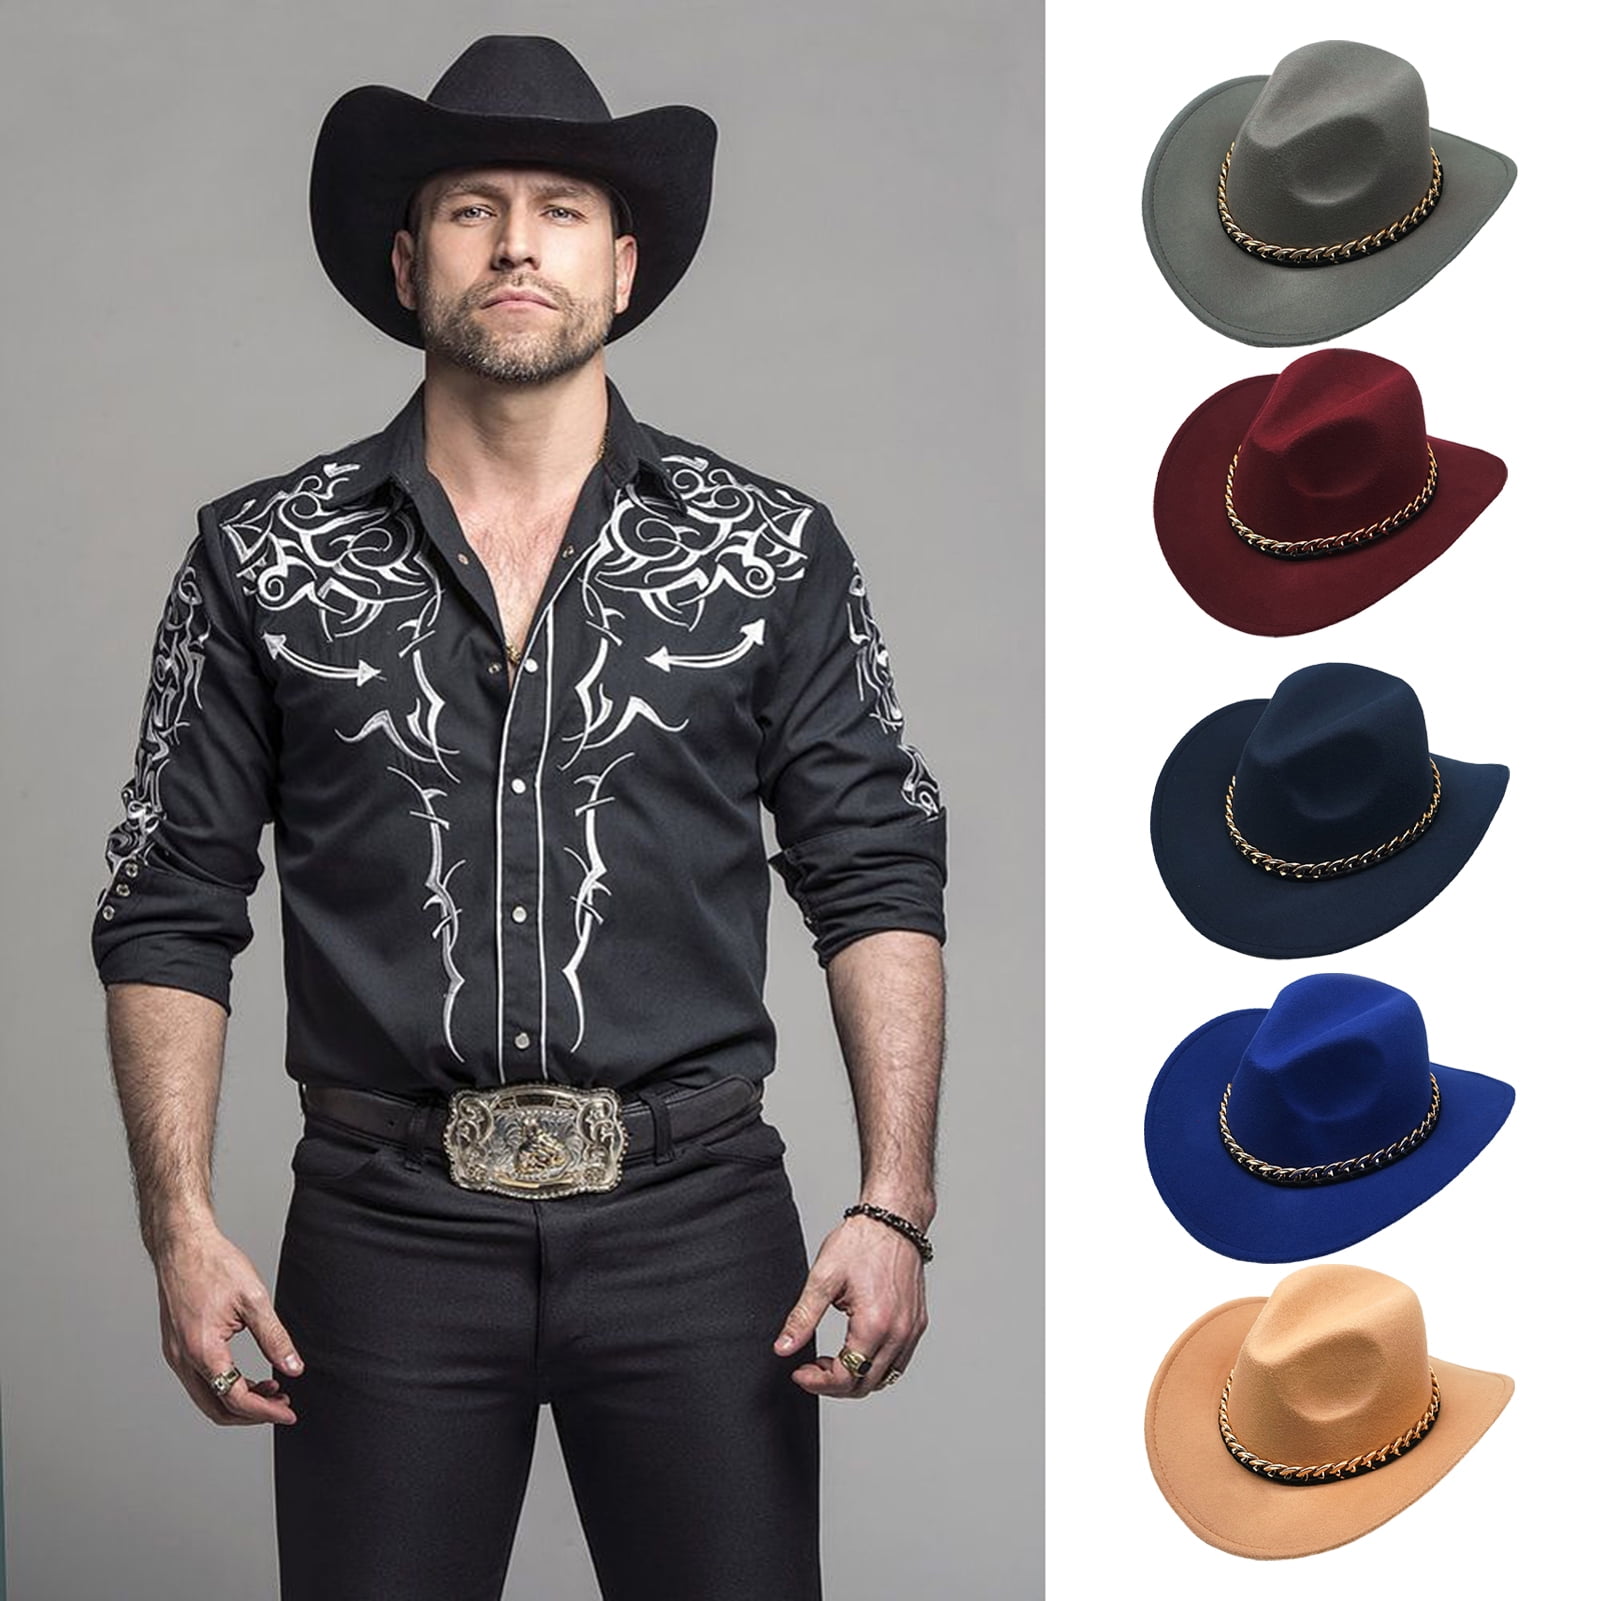 Vintage Western Cowboy Hat With Wide Brim For Men And Women Perfect For  Casual Nordic Outdoor Wear From Sapphirejewelry, $4.53